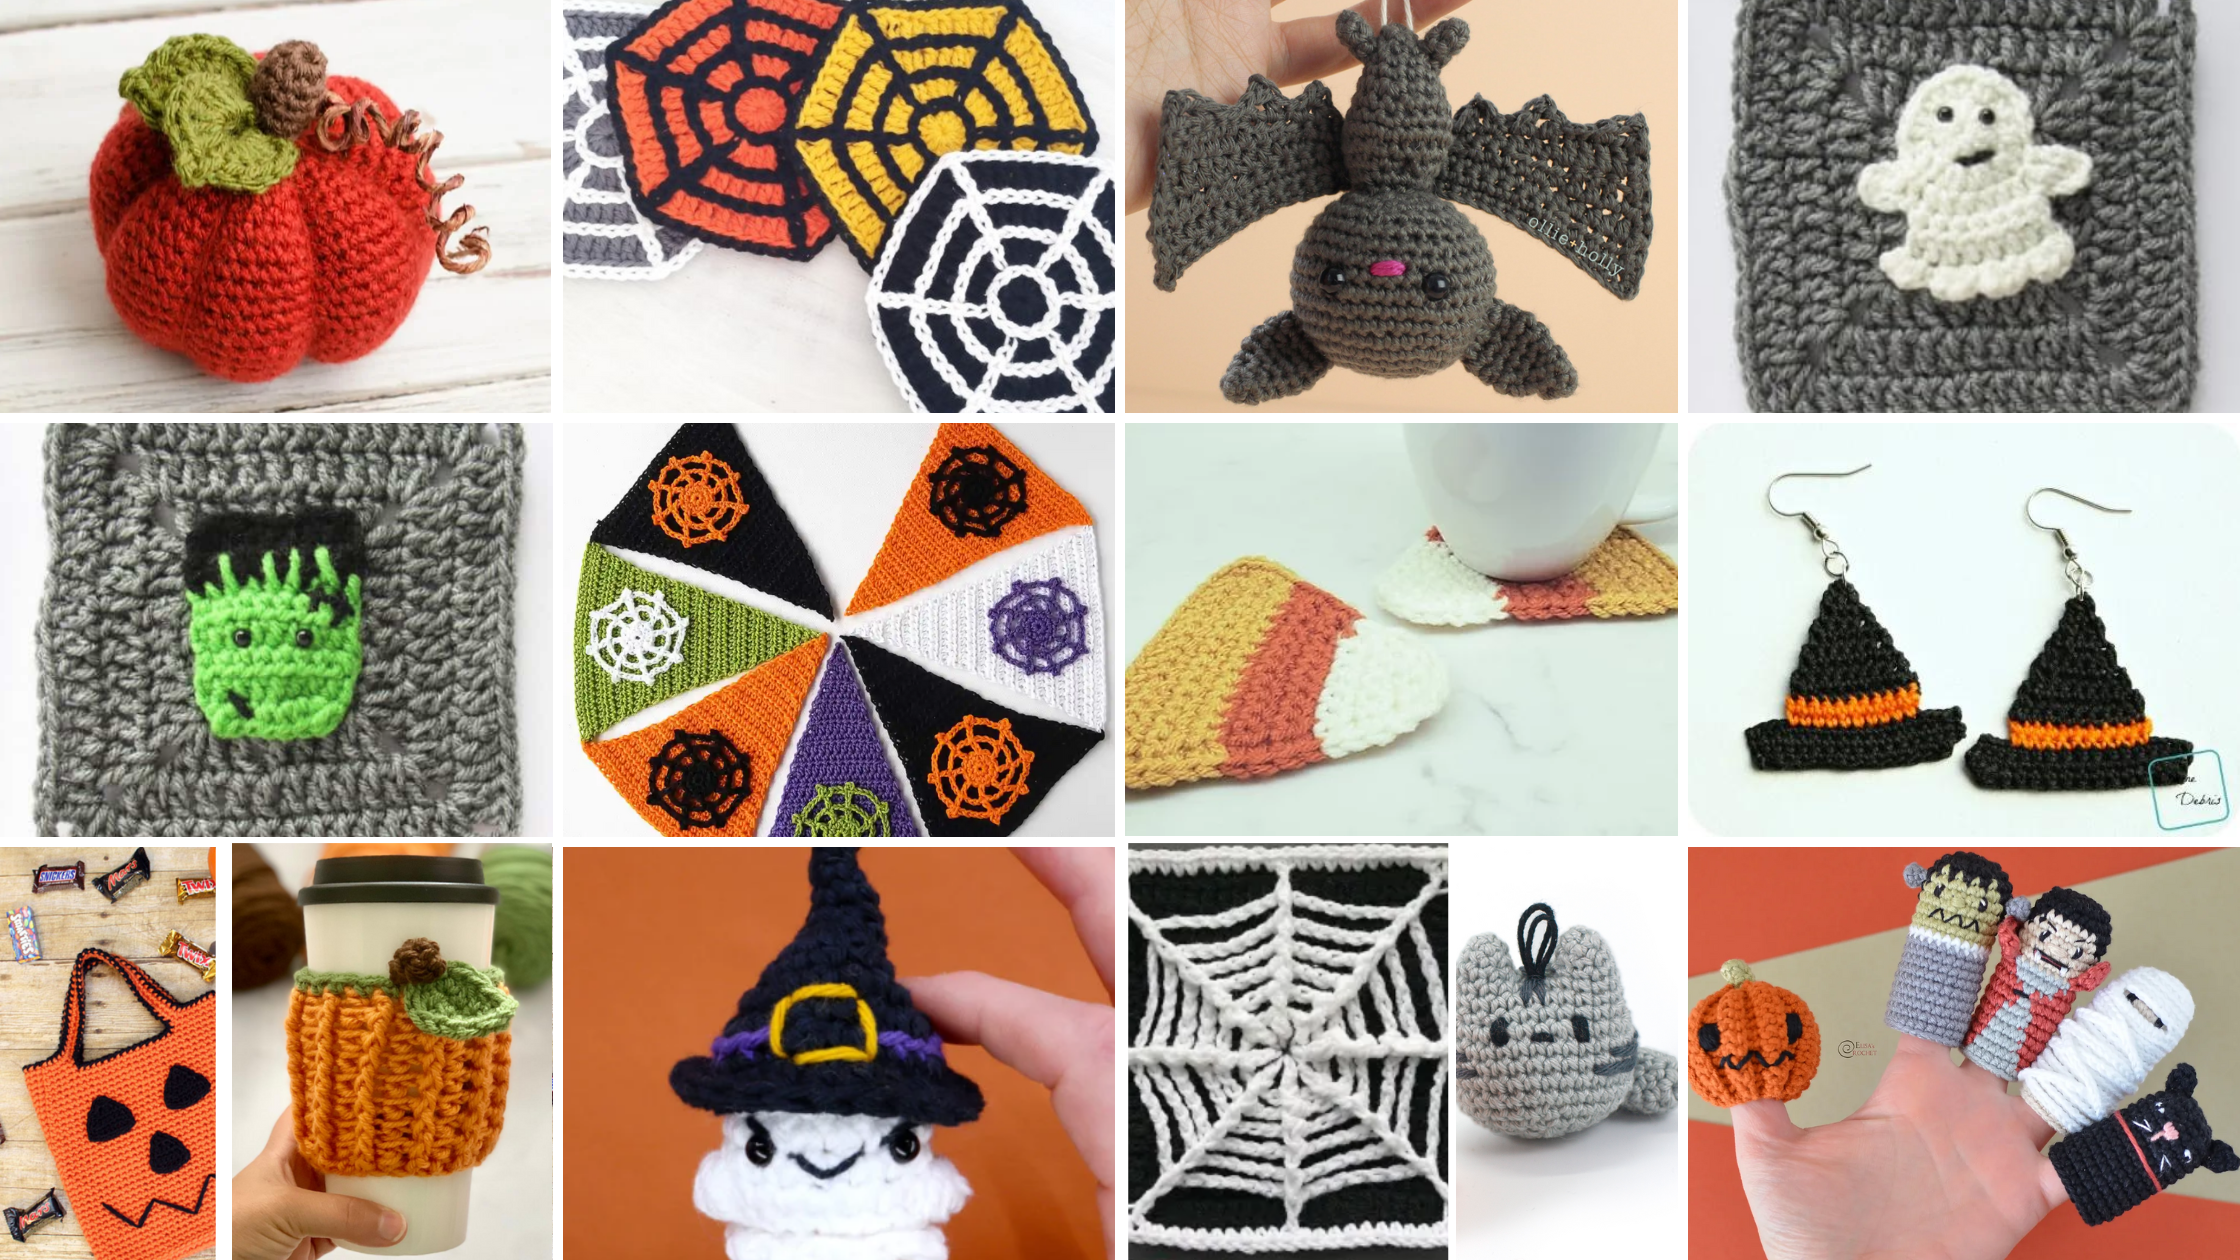 Quick Things to Crochet For Halloween